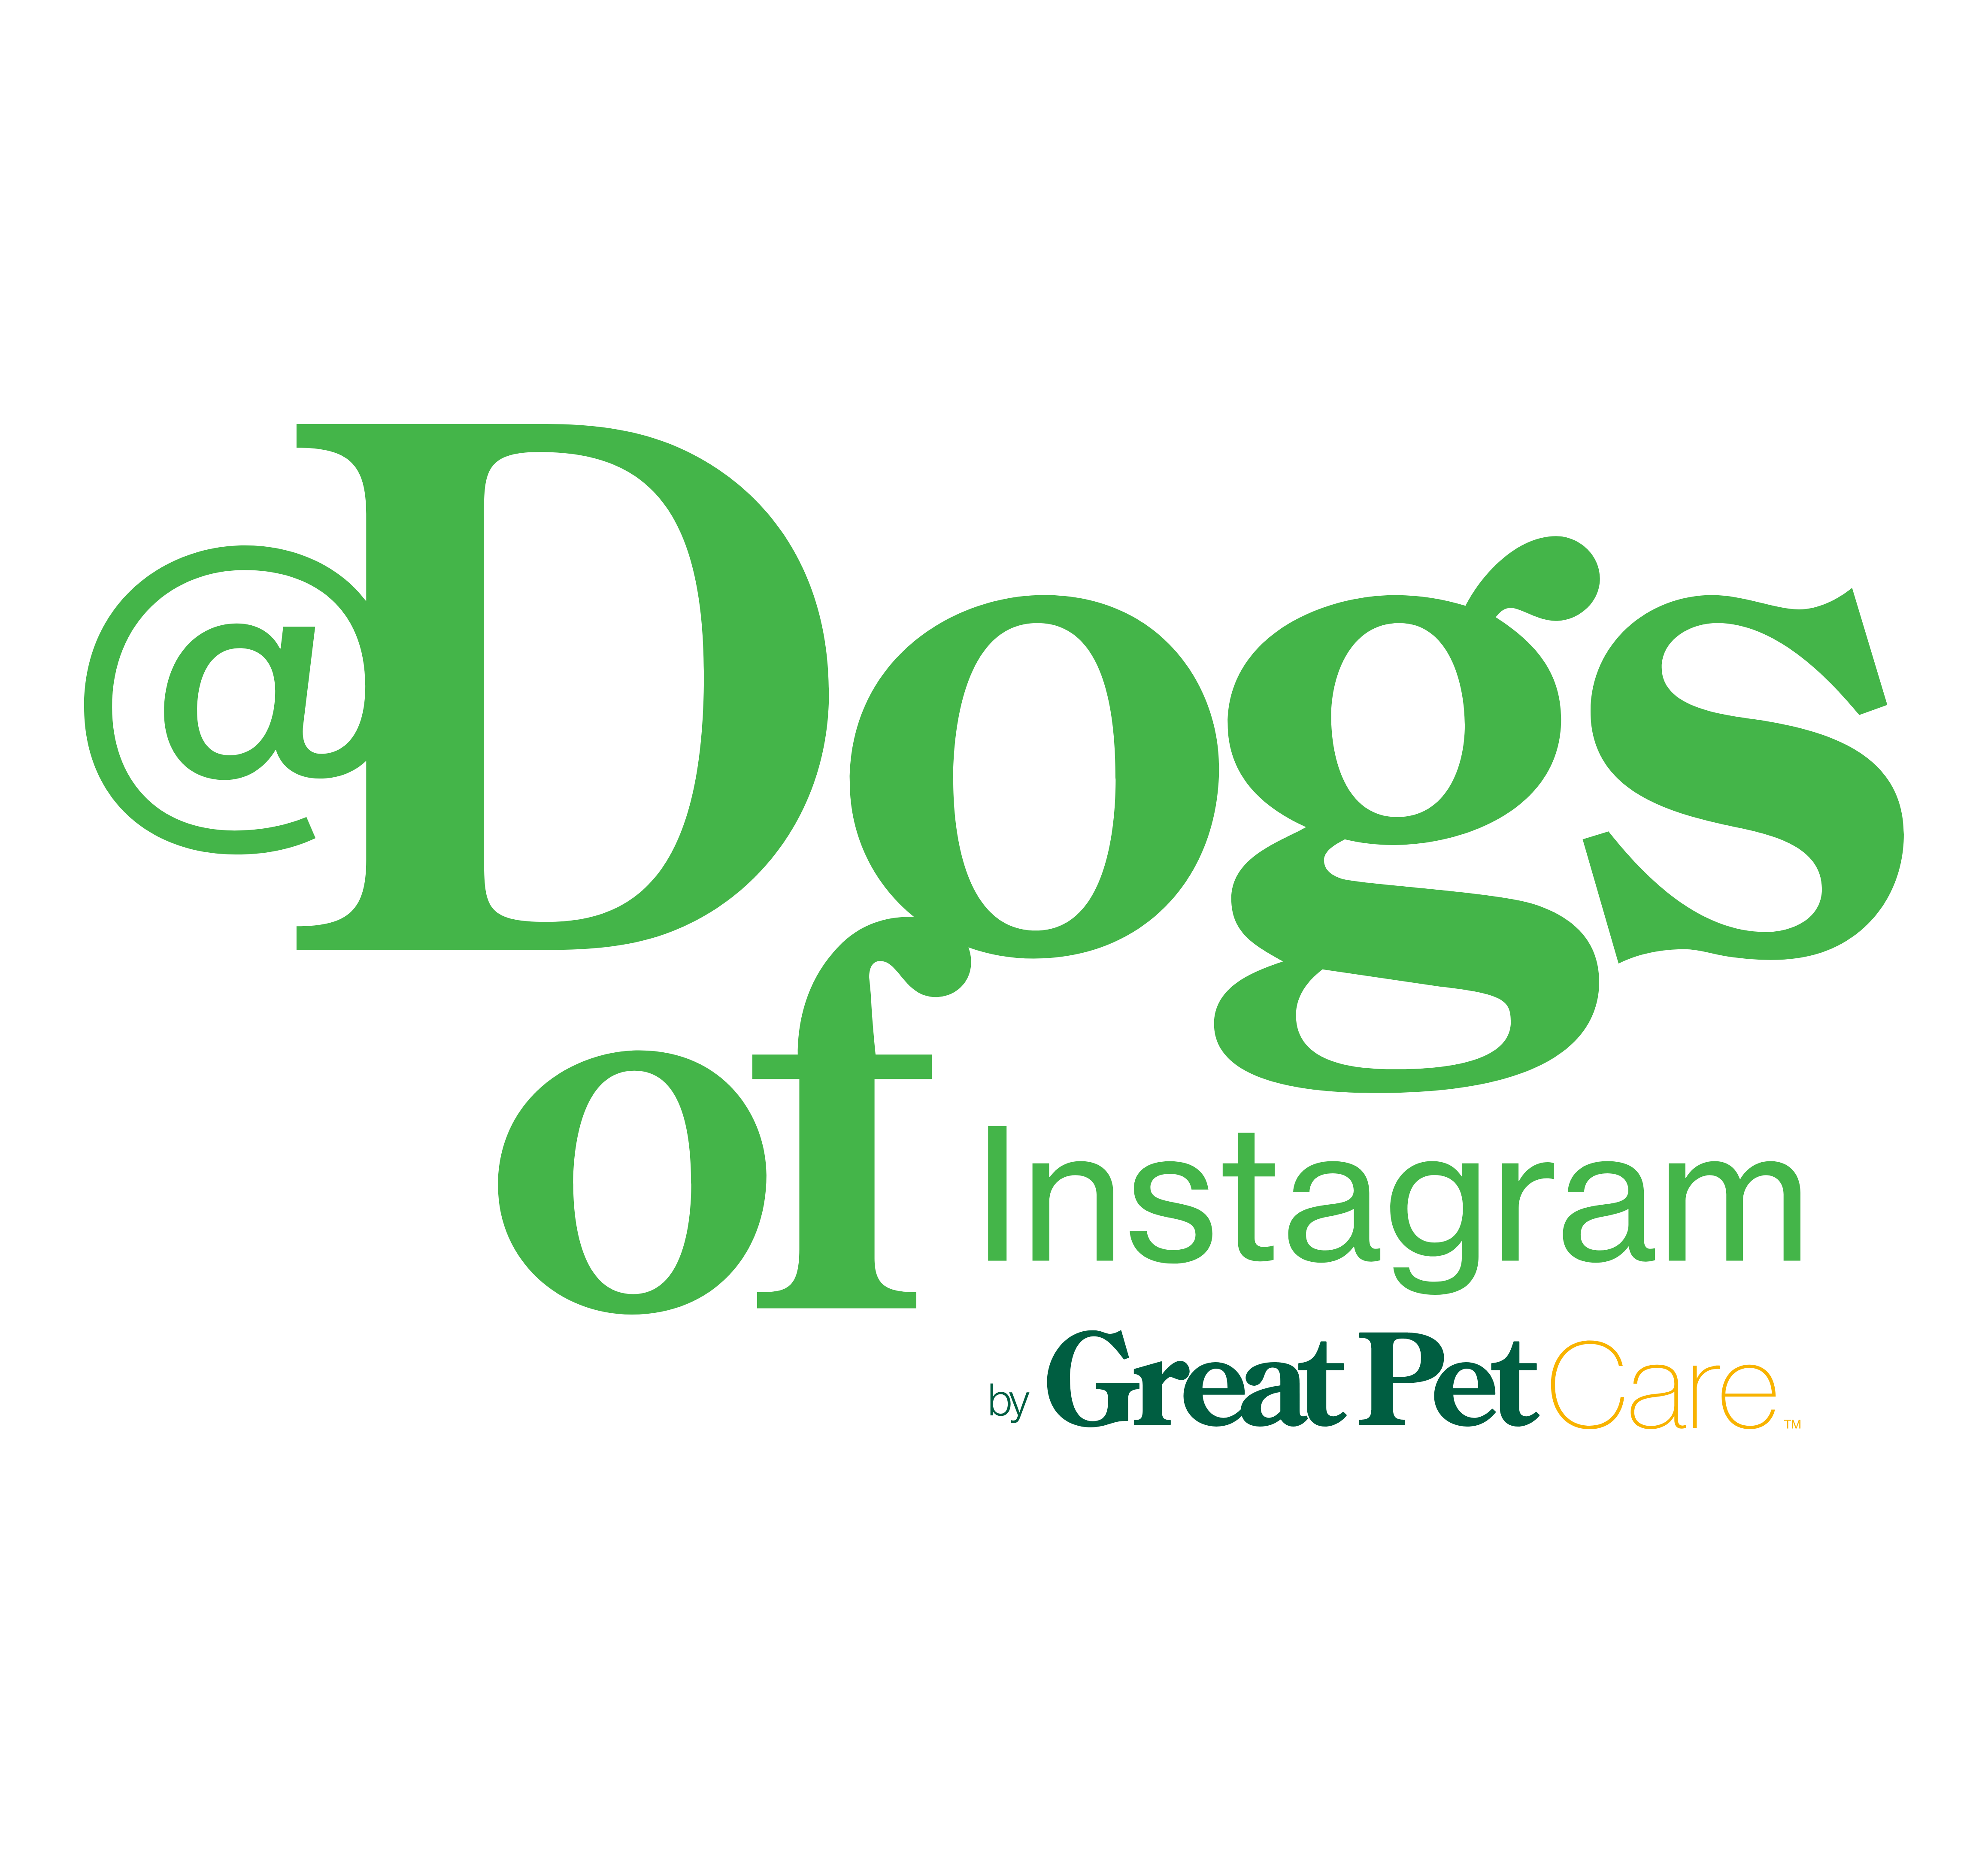 @dogsofinstagram by Great Pet Care